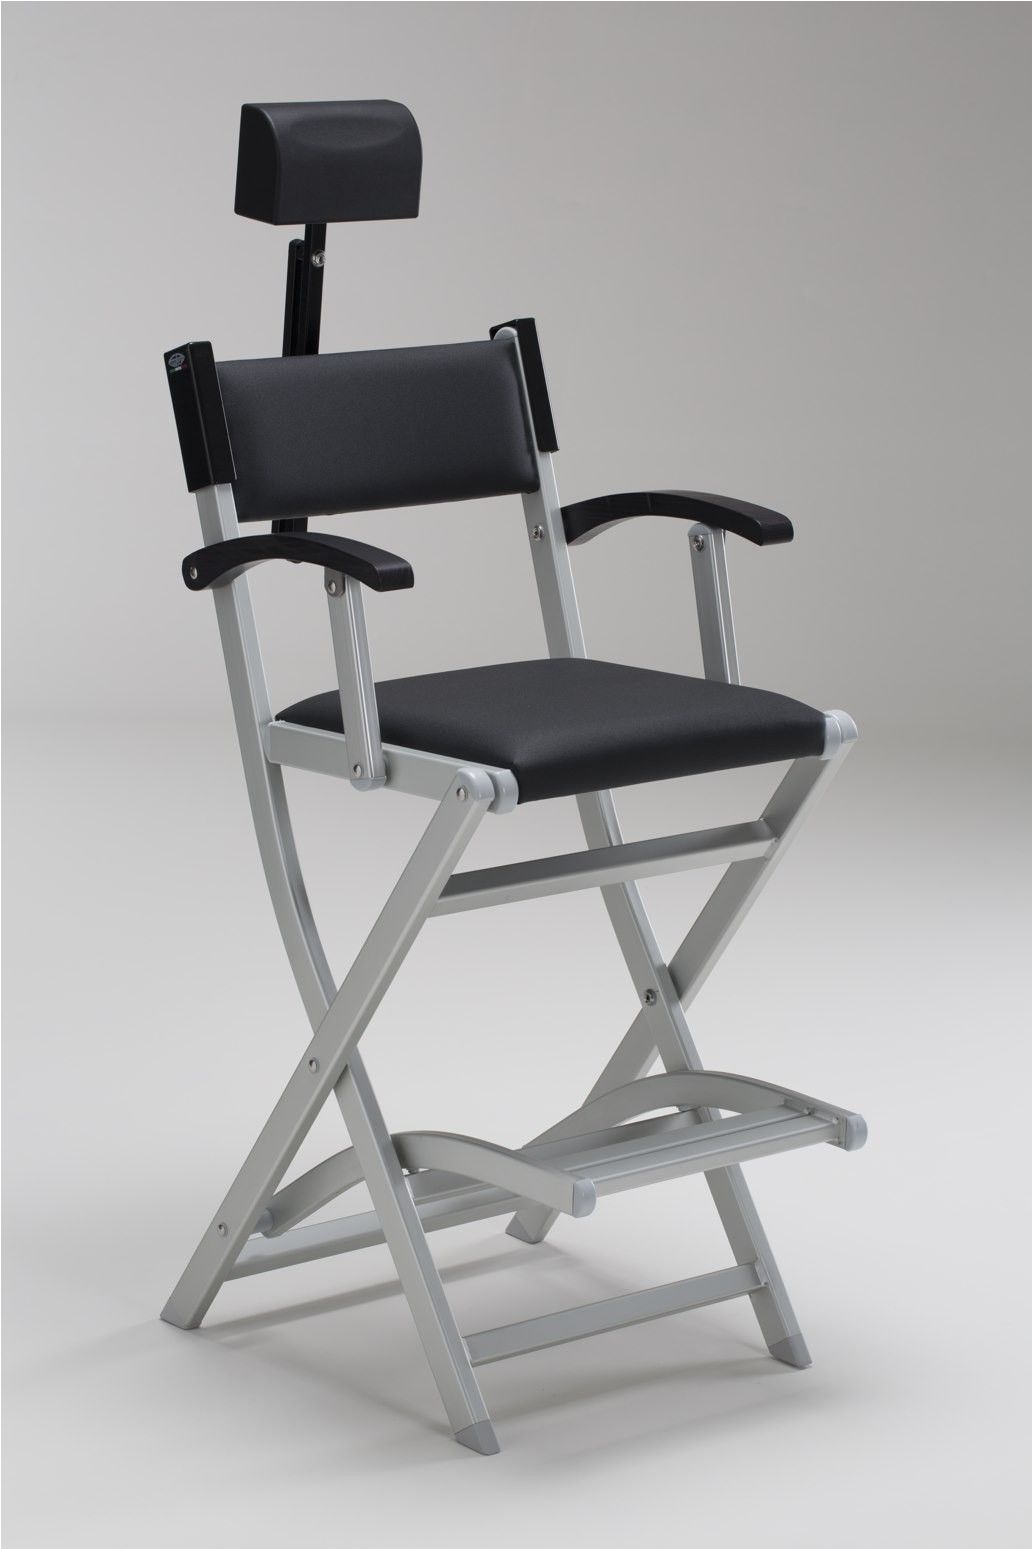 makeup directors chairs cantoni for makeup and aesthetic professionals kit makup chair anti rollover in light aluminum new exclusive design by cantoni